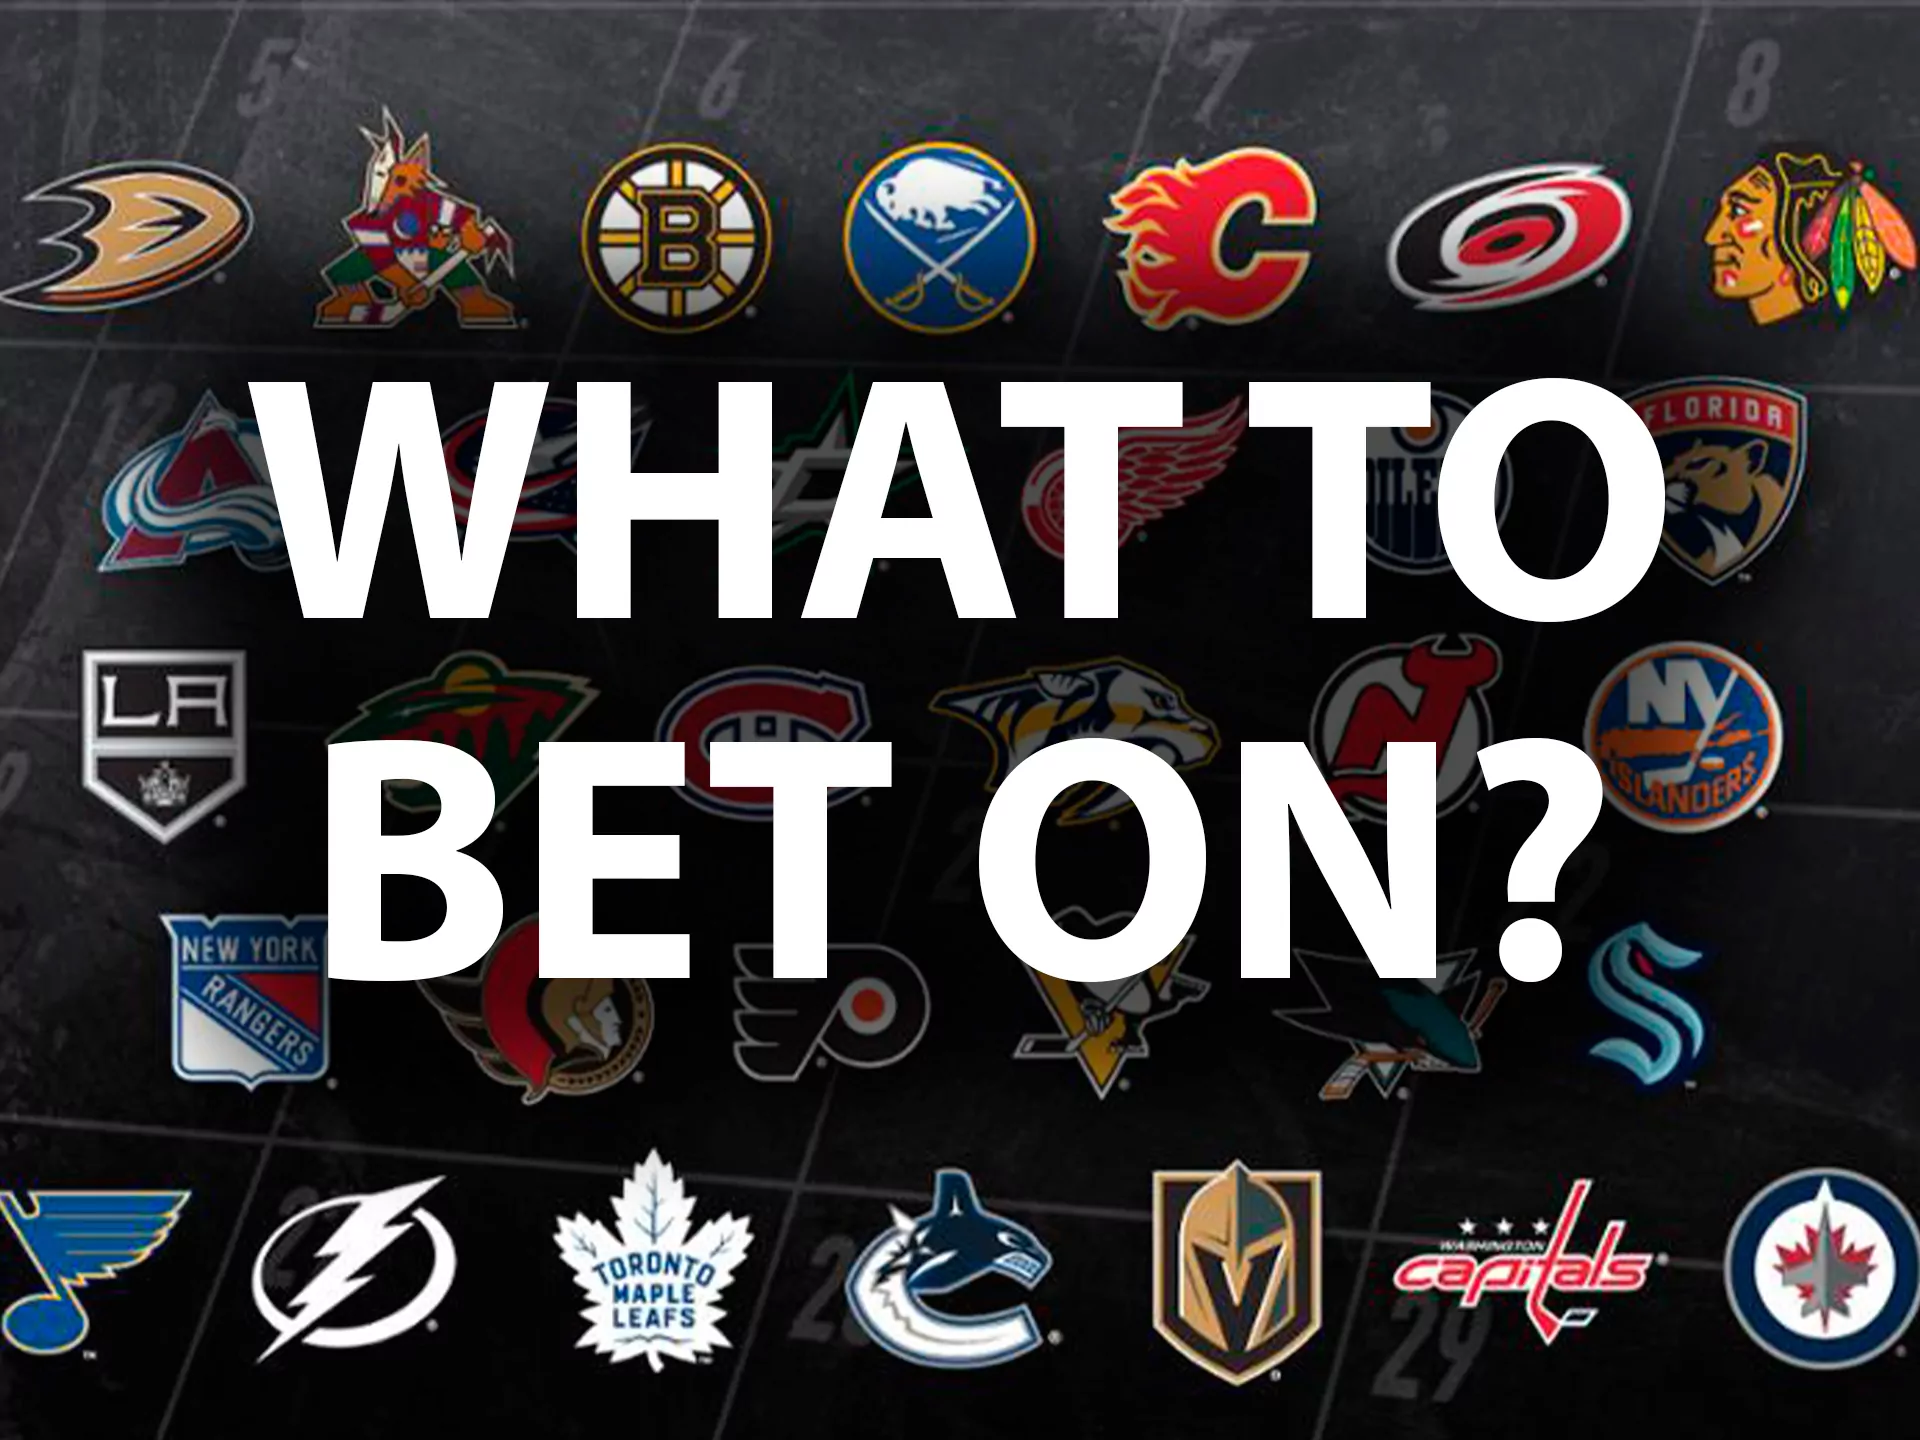 All the best hockey leagues are available for betting at Betcity.